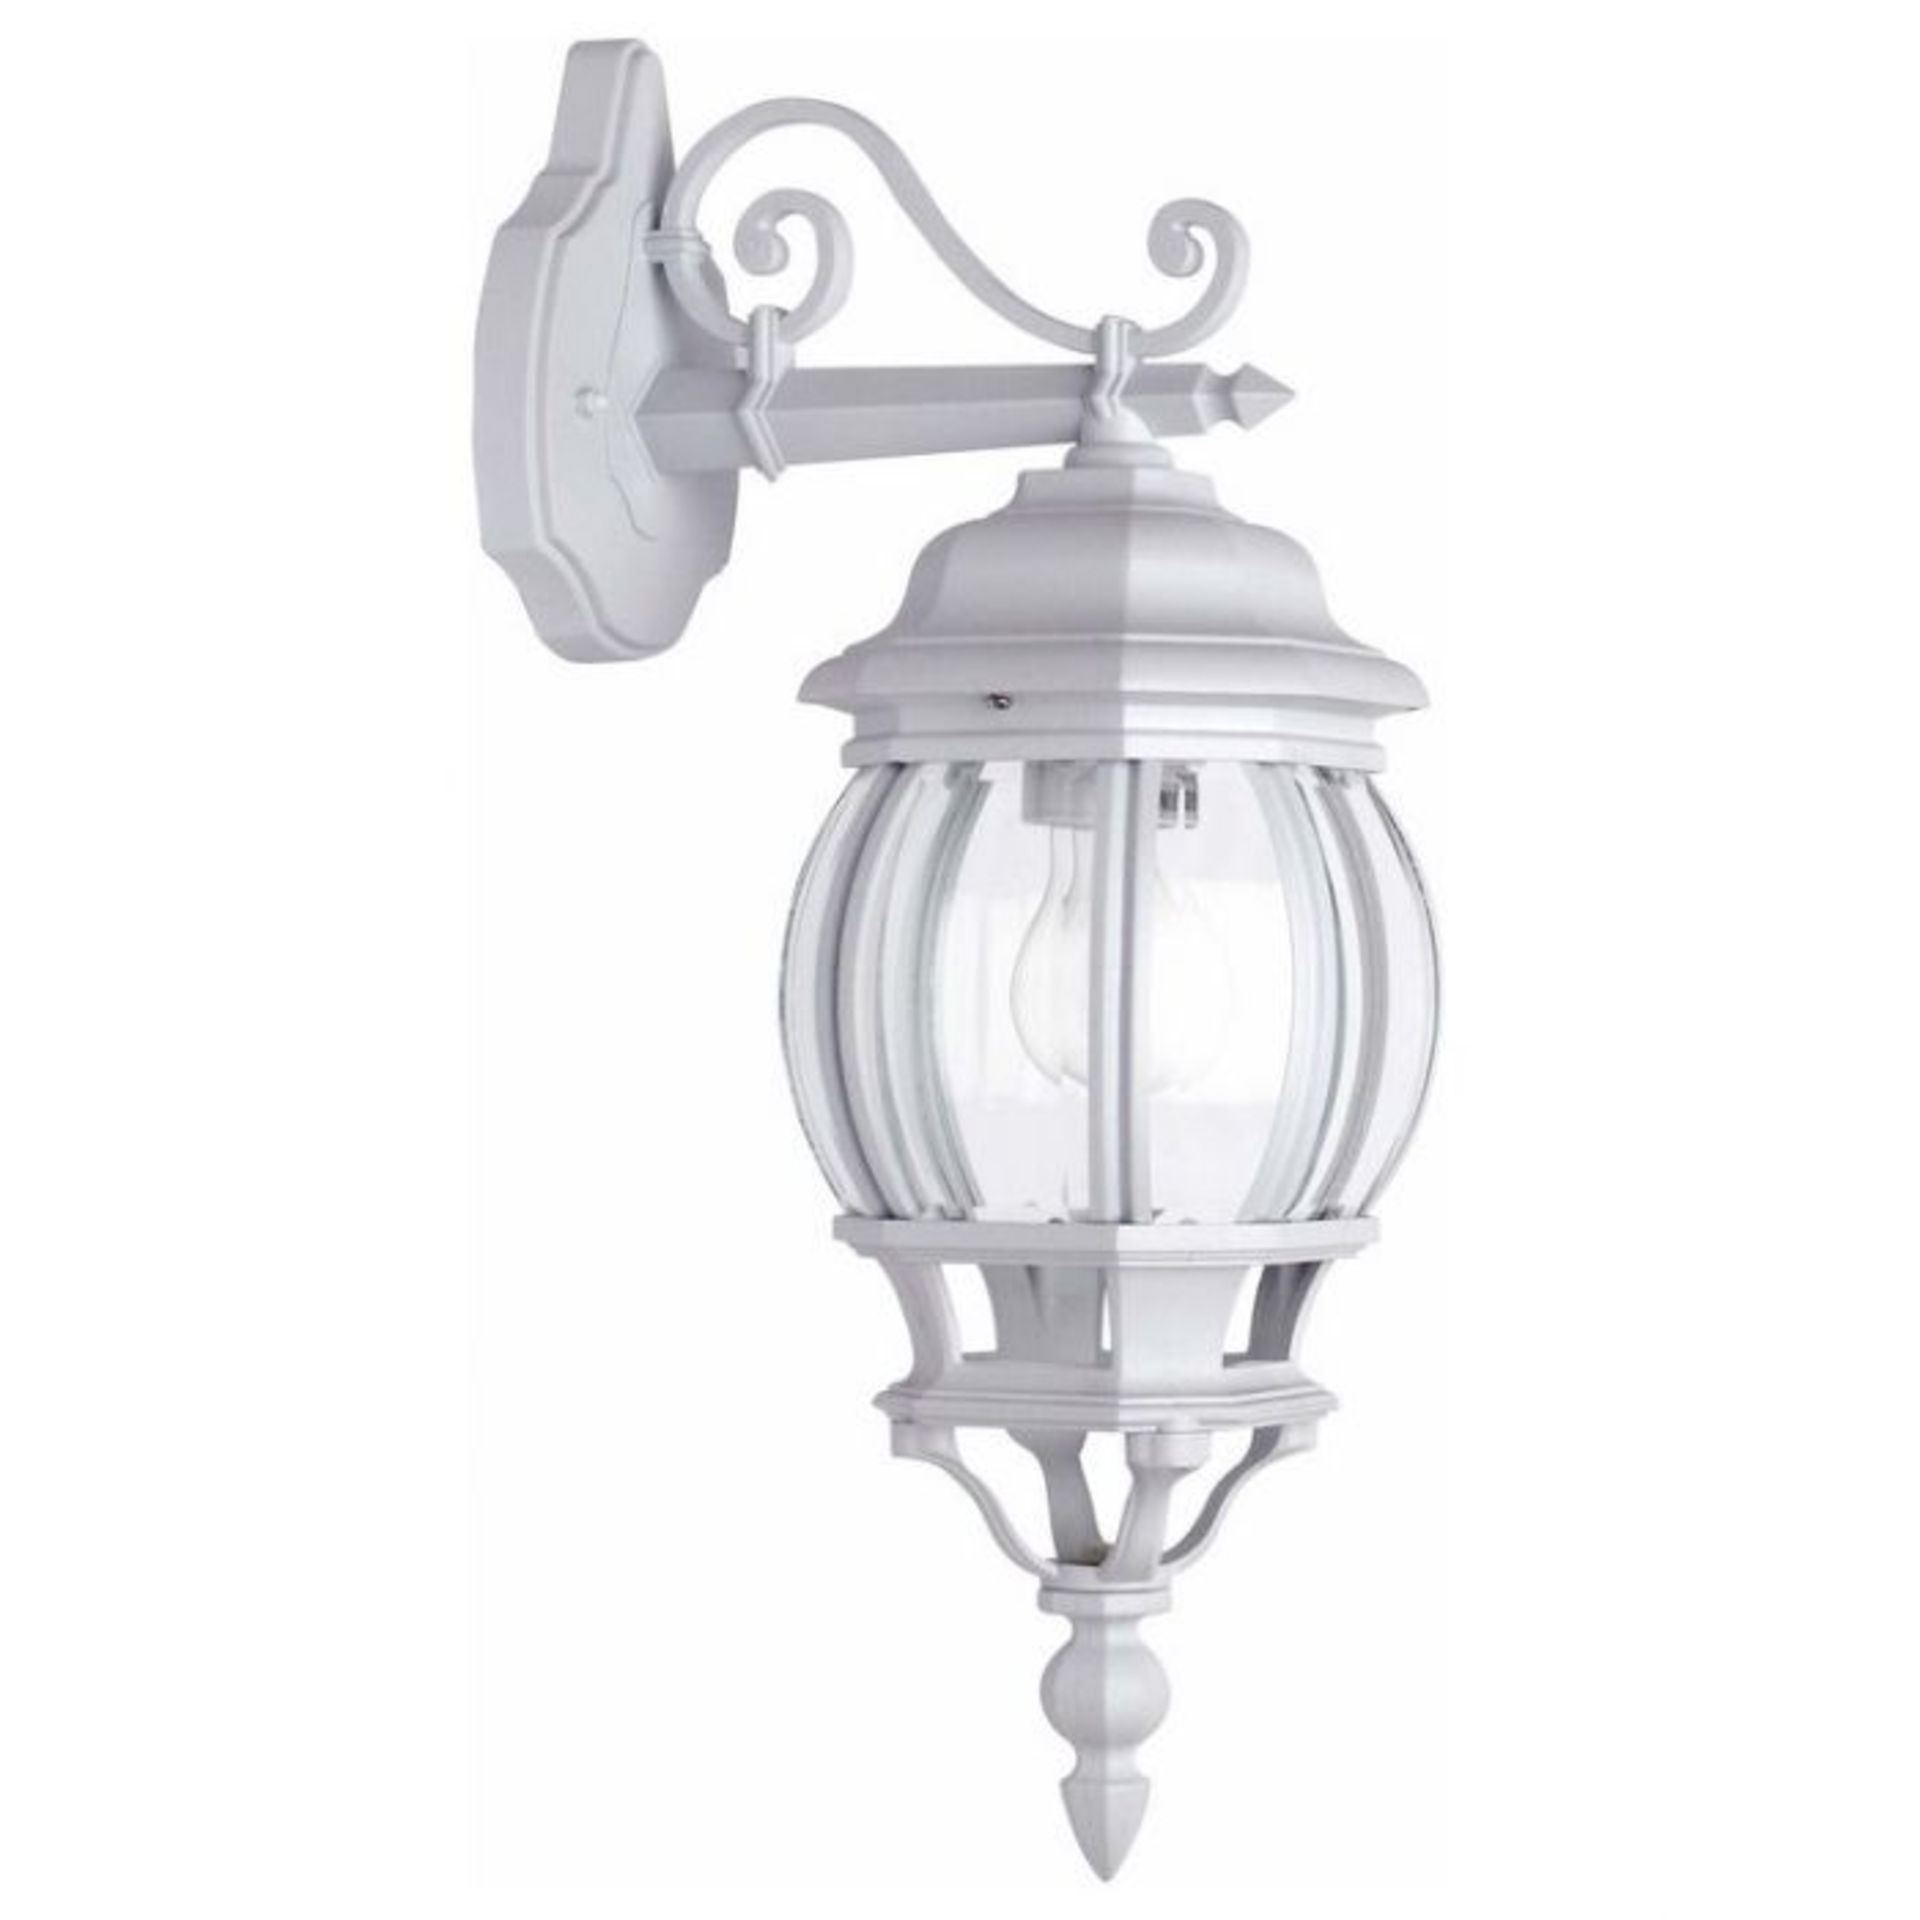 Marlow Home Co, Vada 50Cm H Outdoor Wall Lantern White - RRP £74.99 (IGF1101 - 24658/43)